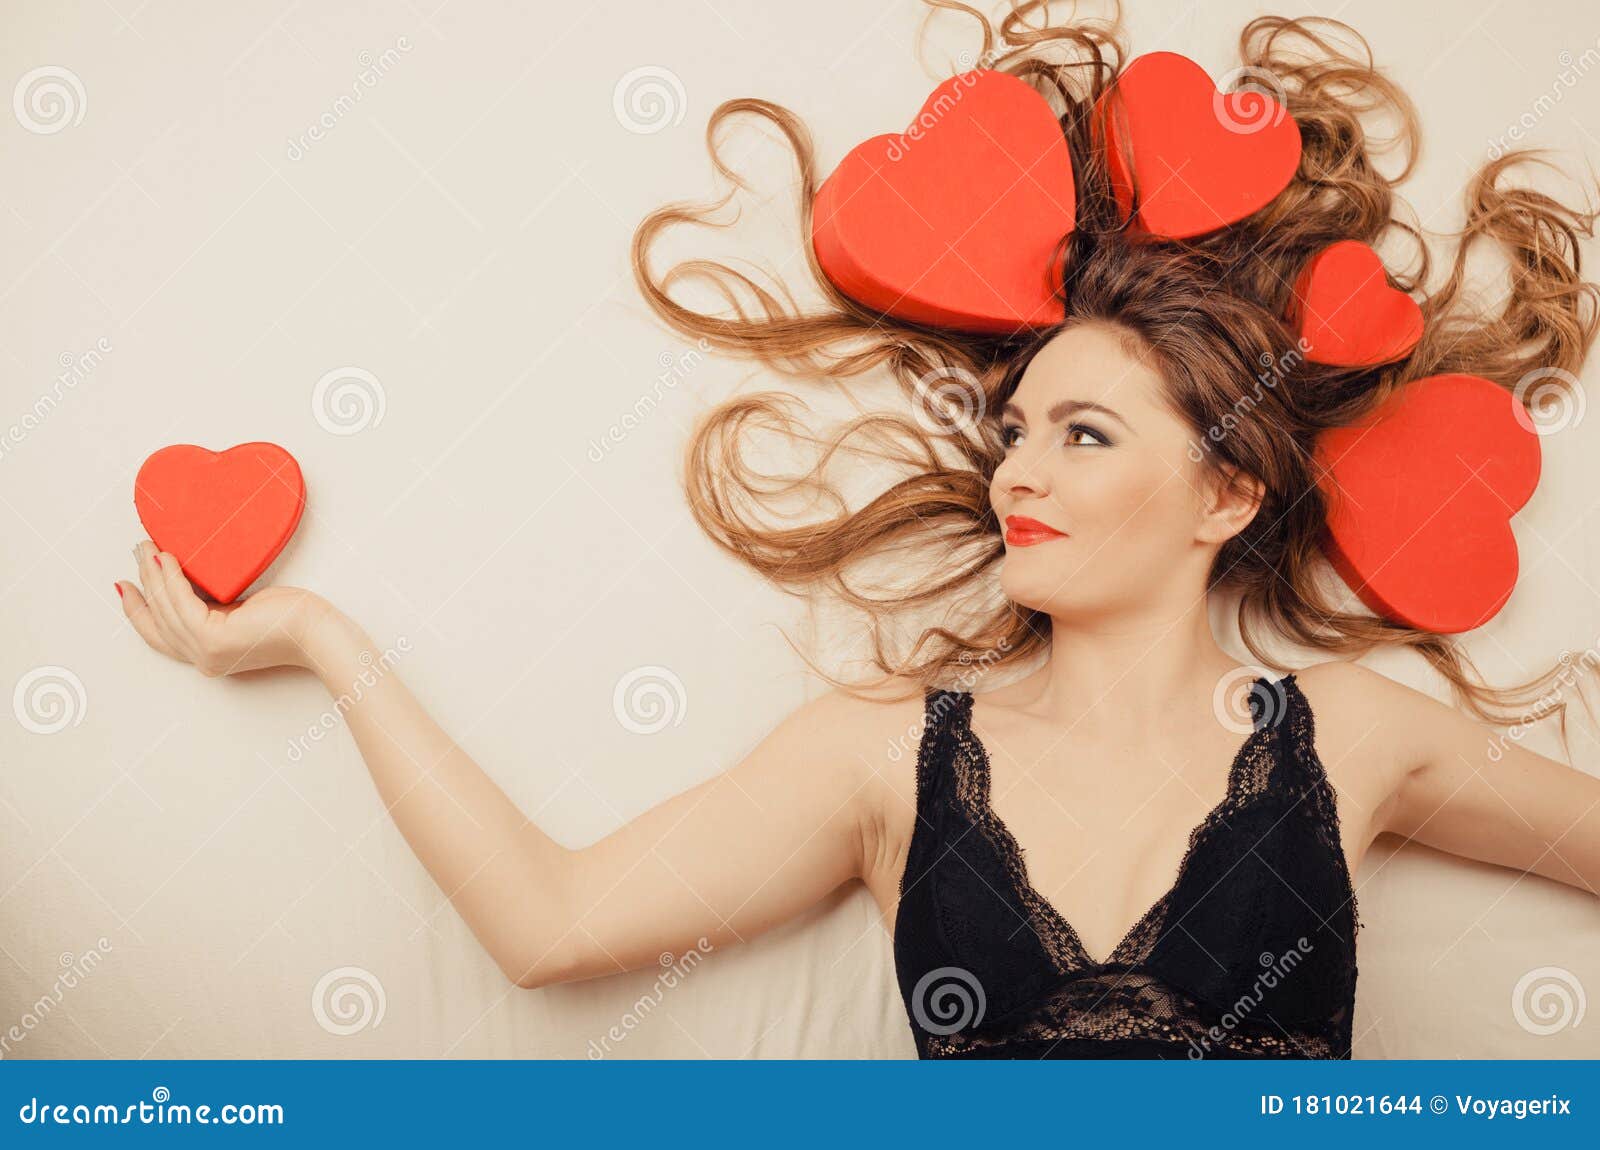 Woman in Lingerie in Bed. Valentines Day Love Stock Photo - Image